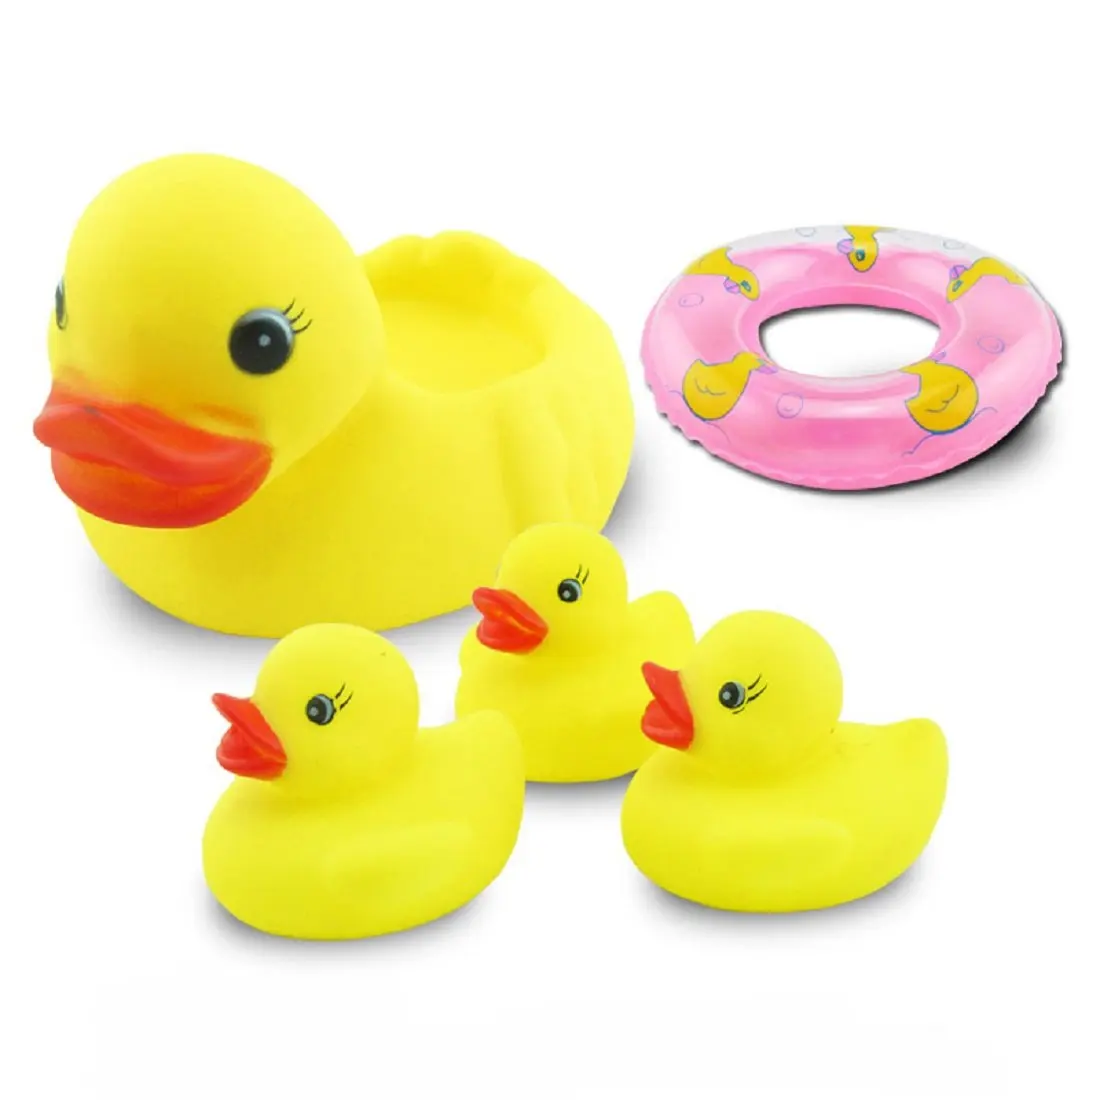 Buy Vivile Safety Rubber Baby Bath Duck Family Set Of 5 Mother Duck 3 Baby Duckies And Swim Ring Floating Bath Tub Toy For Kids Bath Time Joy Yellow In Cheap Price On Alibaba Com